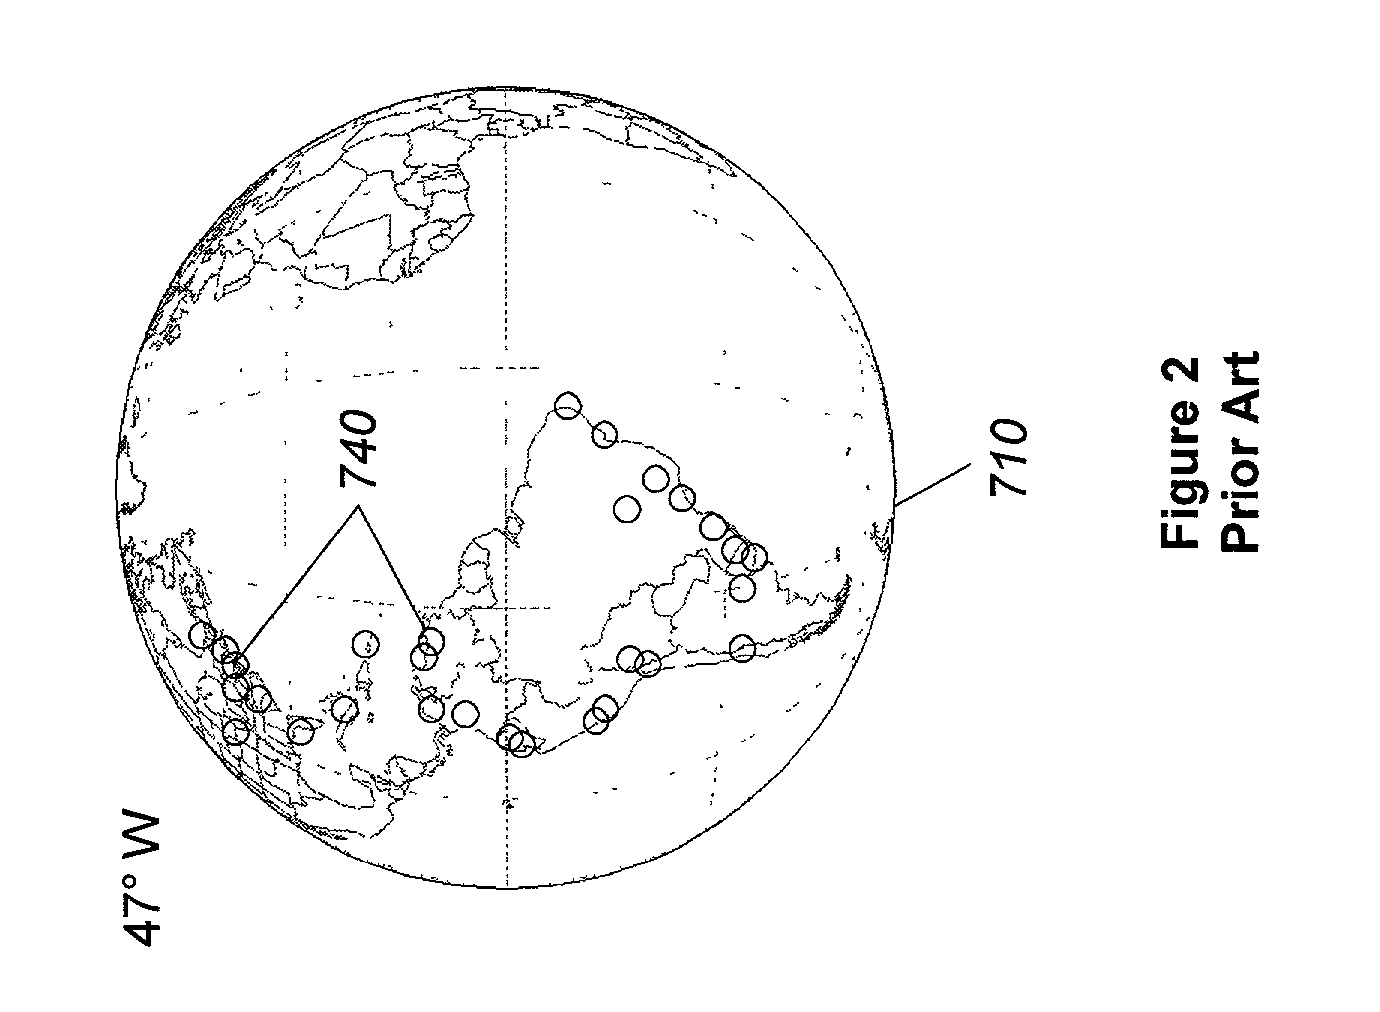 Apparatus and method to implement a flexible hub-spoke satellite communications network